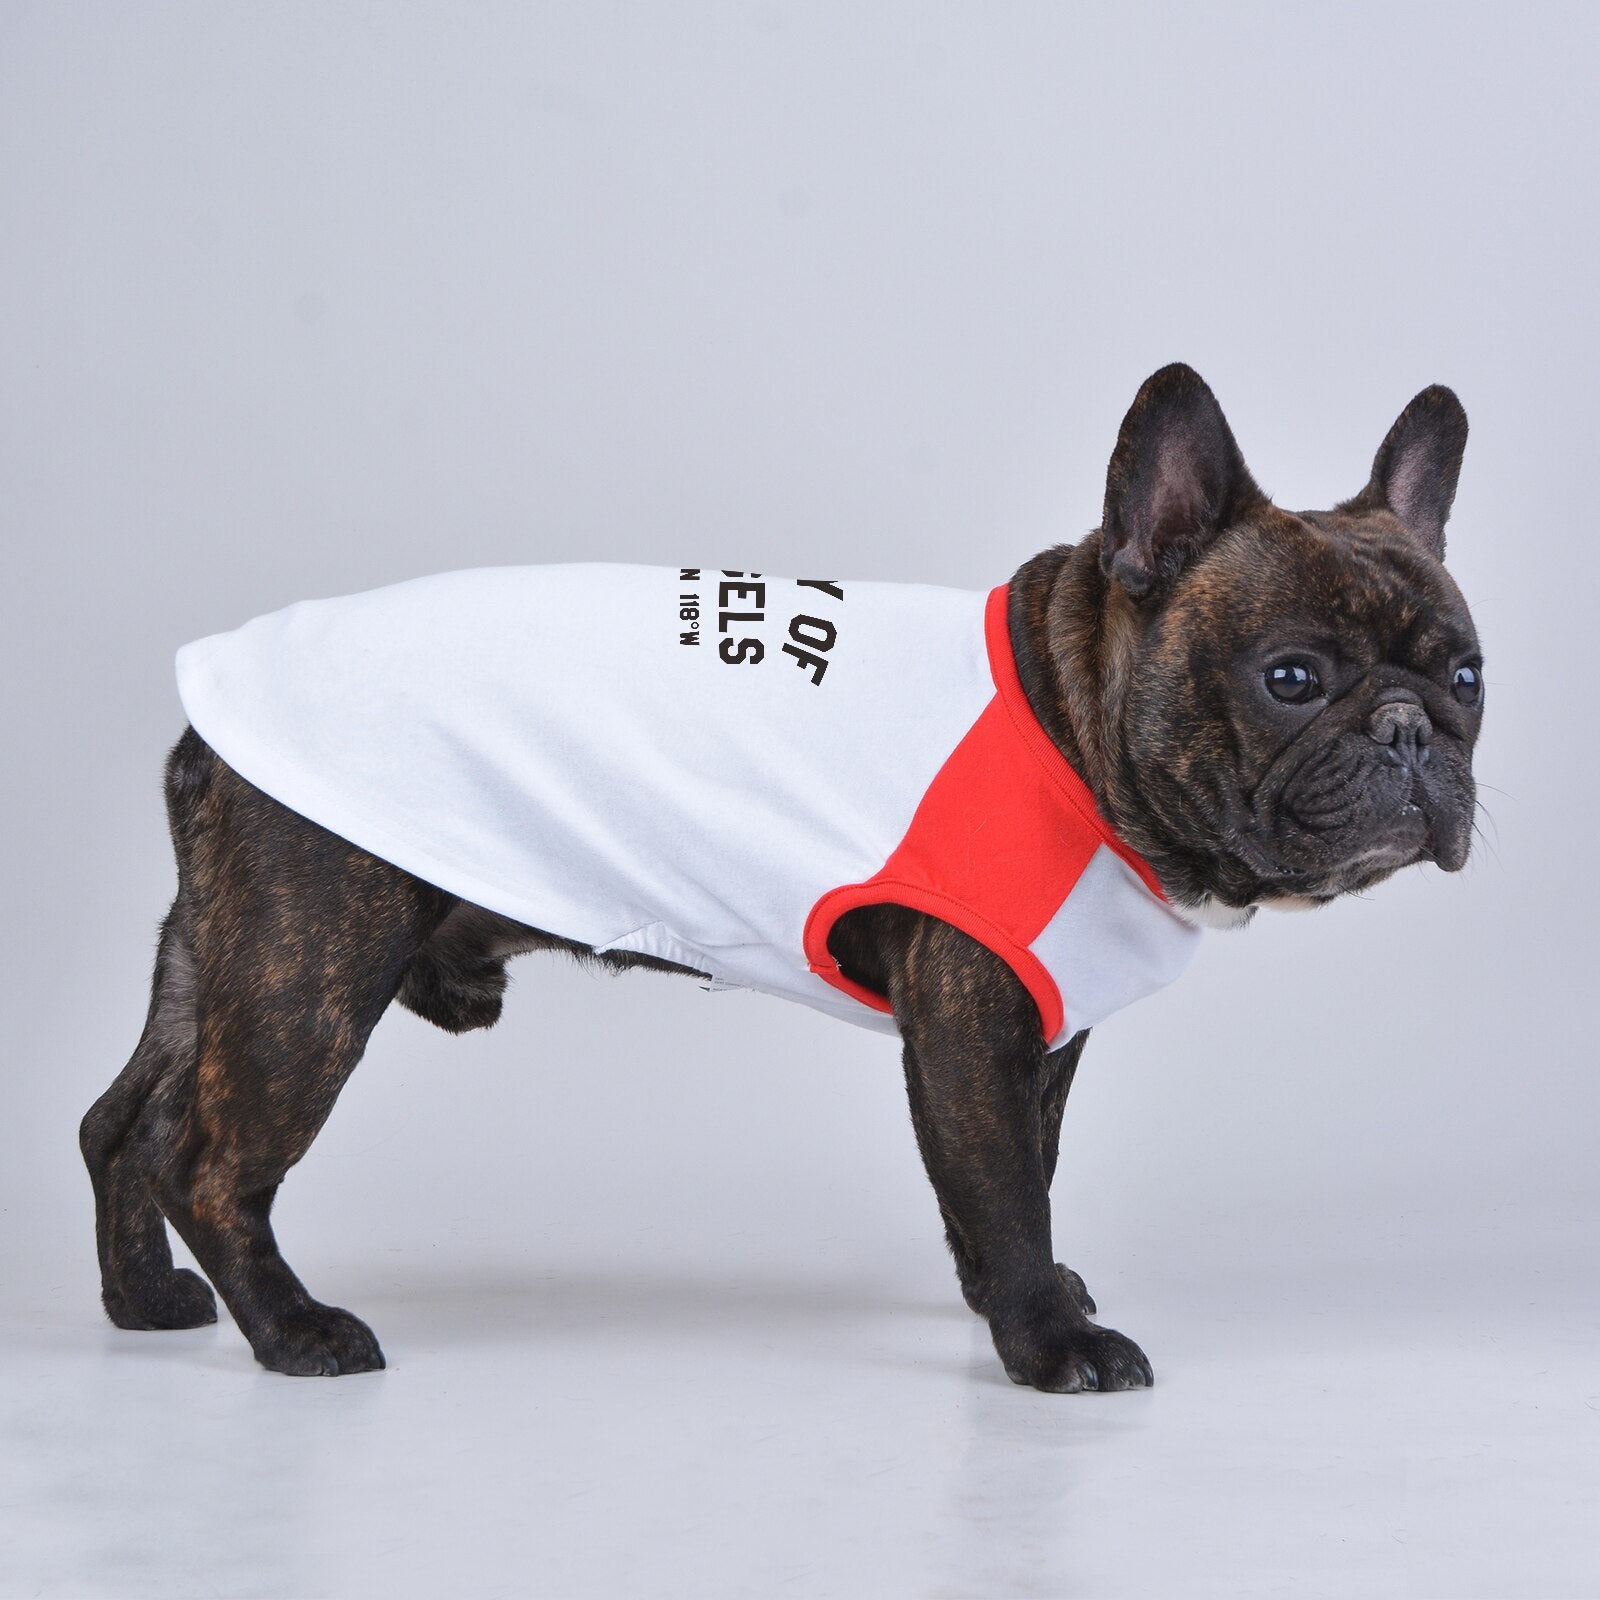 Cute Dog Tshirt Sleveless Clothes Vest for Small Medium Large Big Pets Cats, Stylish Summer Cool Apparel